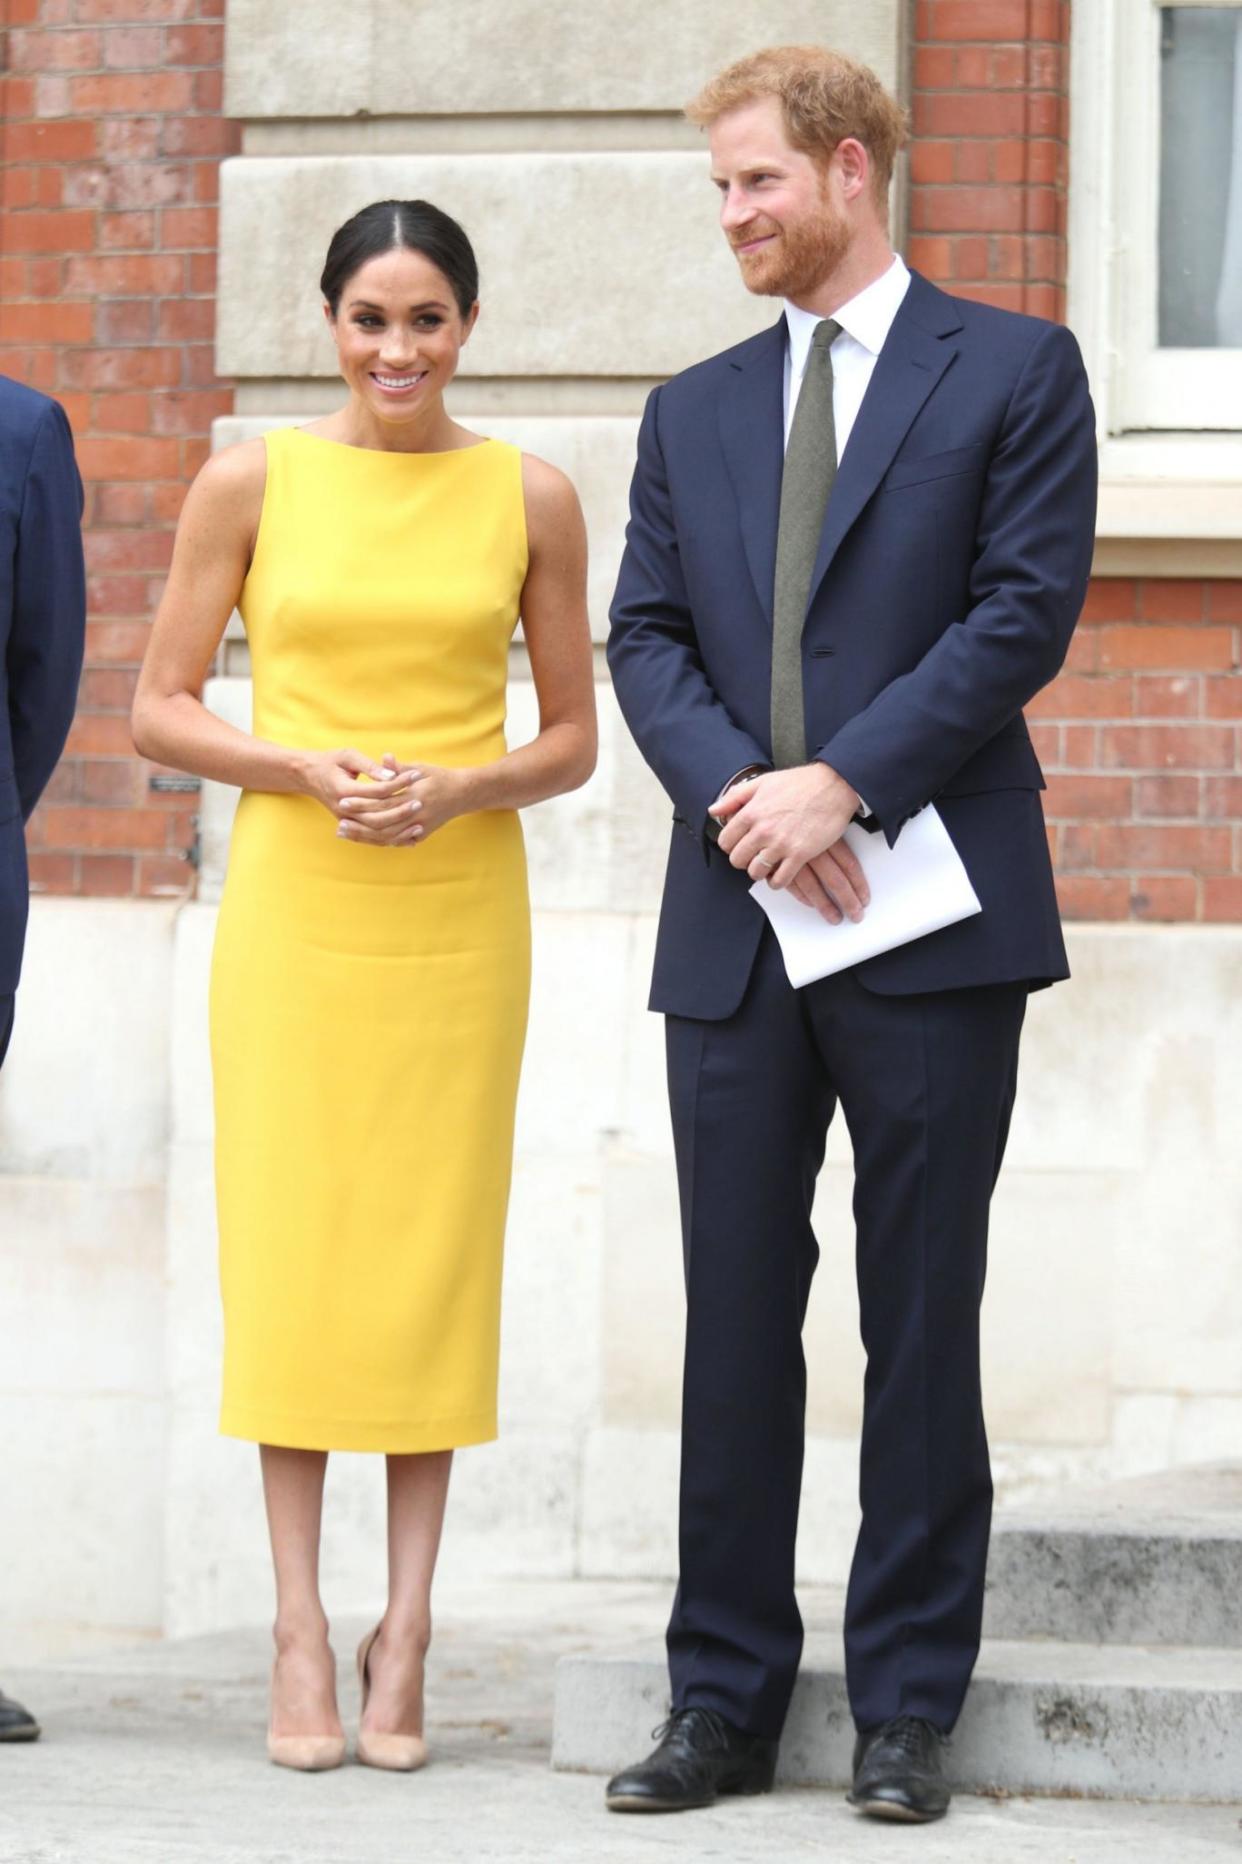 Meghan Markle dazzles in yellow as she joins Prince Harry at the “Your Commonwealth” youth reception in London. (Photo: AP Images)